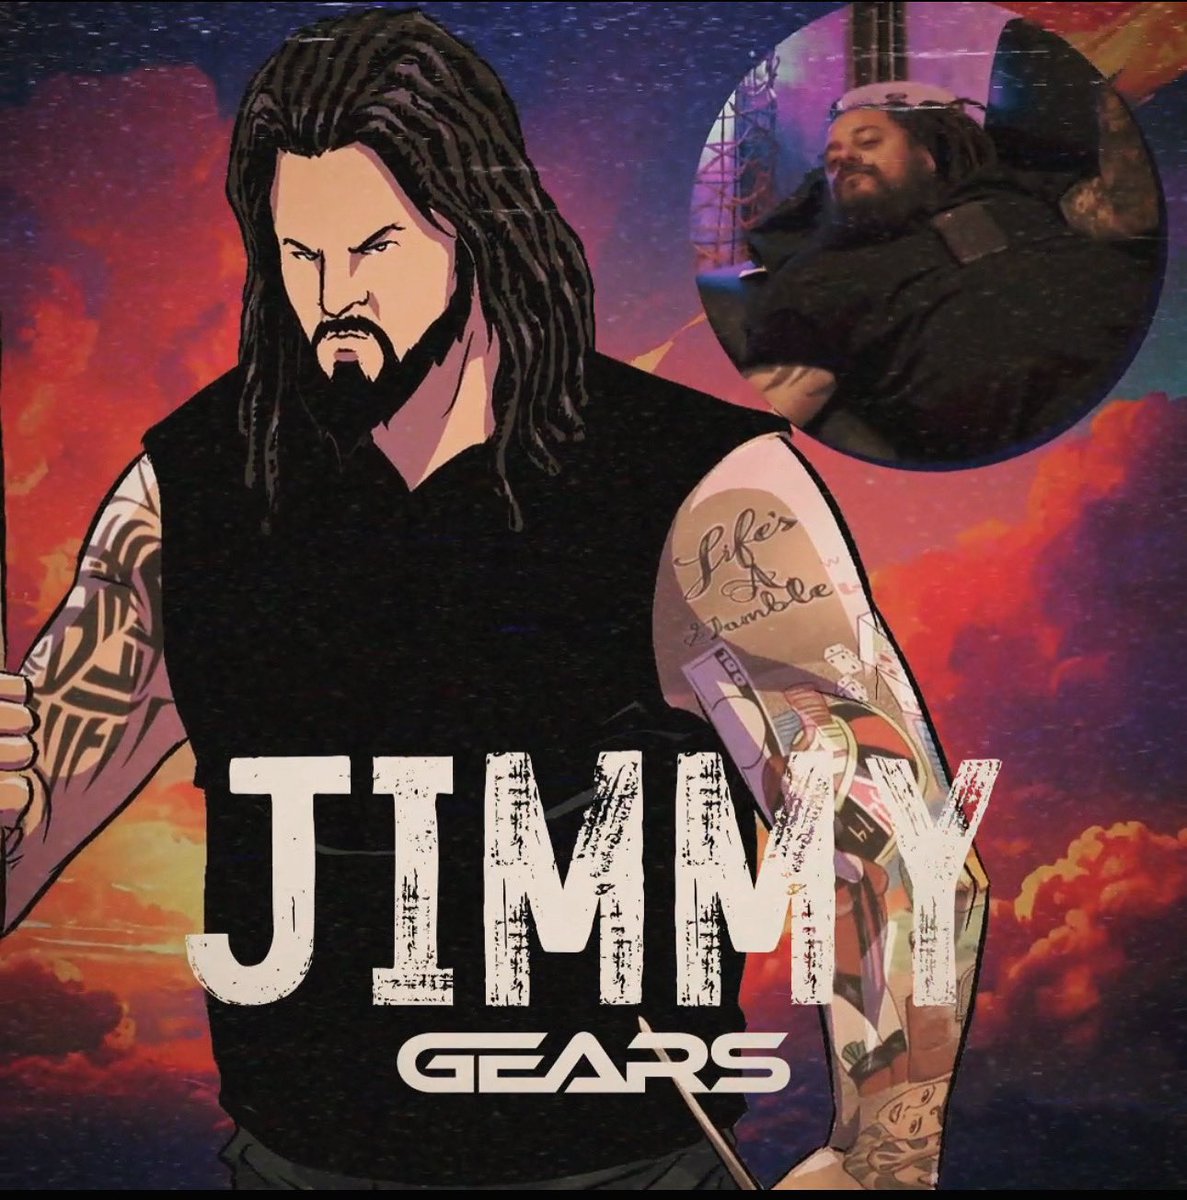 Big Daddy Drummer Day in Camp Gears!

Send ALL the love and good wishes to our boy @jimmydubdrums - IT’S HIS BIRTHDAY 🎉 

We love ya ❤️

#gearsbandofficial #jimmywooten #happybirthday #weloveyou